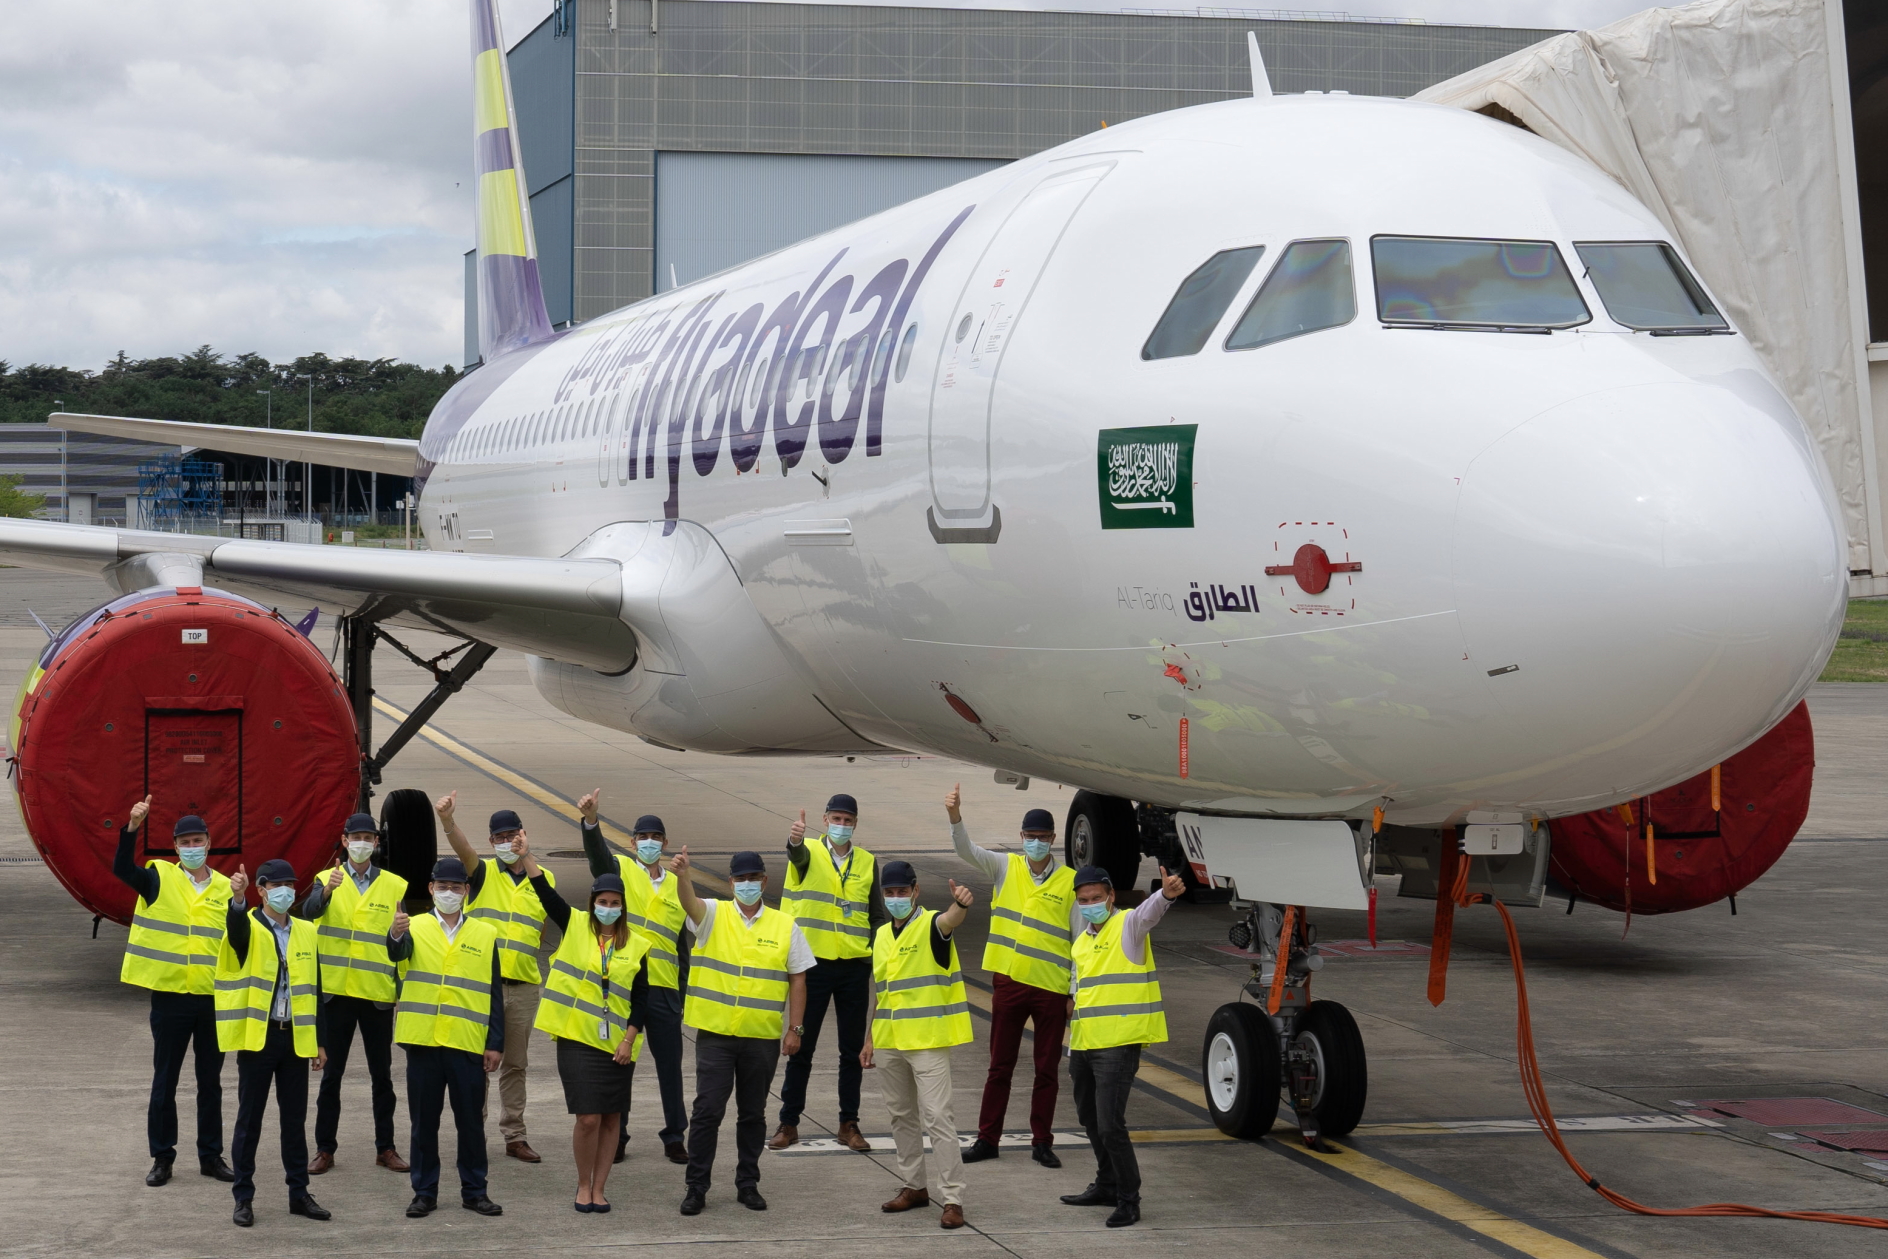 flyadeal, the low-cost Jeddah-based airline owned by Saudi Arabian Airlines, has signed a long-term Flight Hour Services (FHS) agreement with Airbus to support its A320 fleet. Click to enlarge.